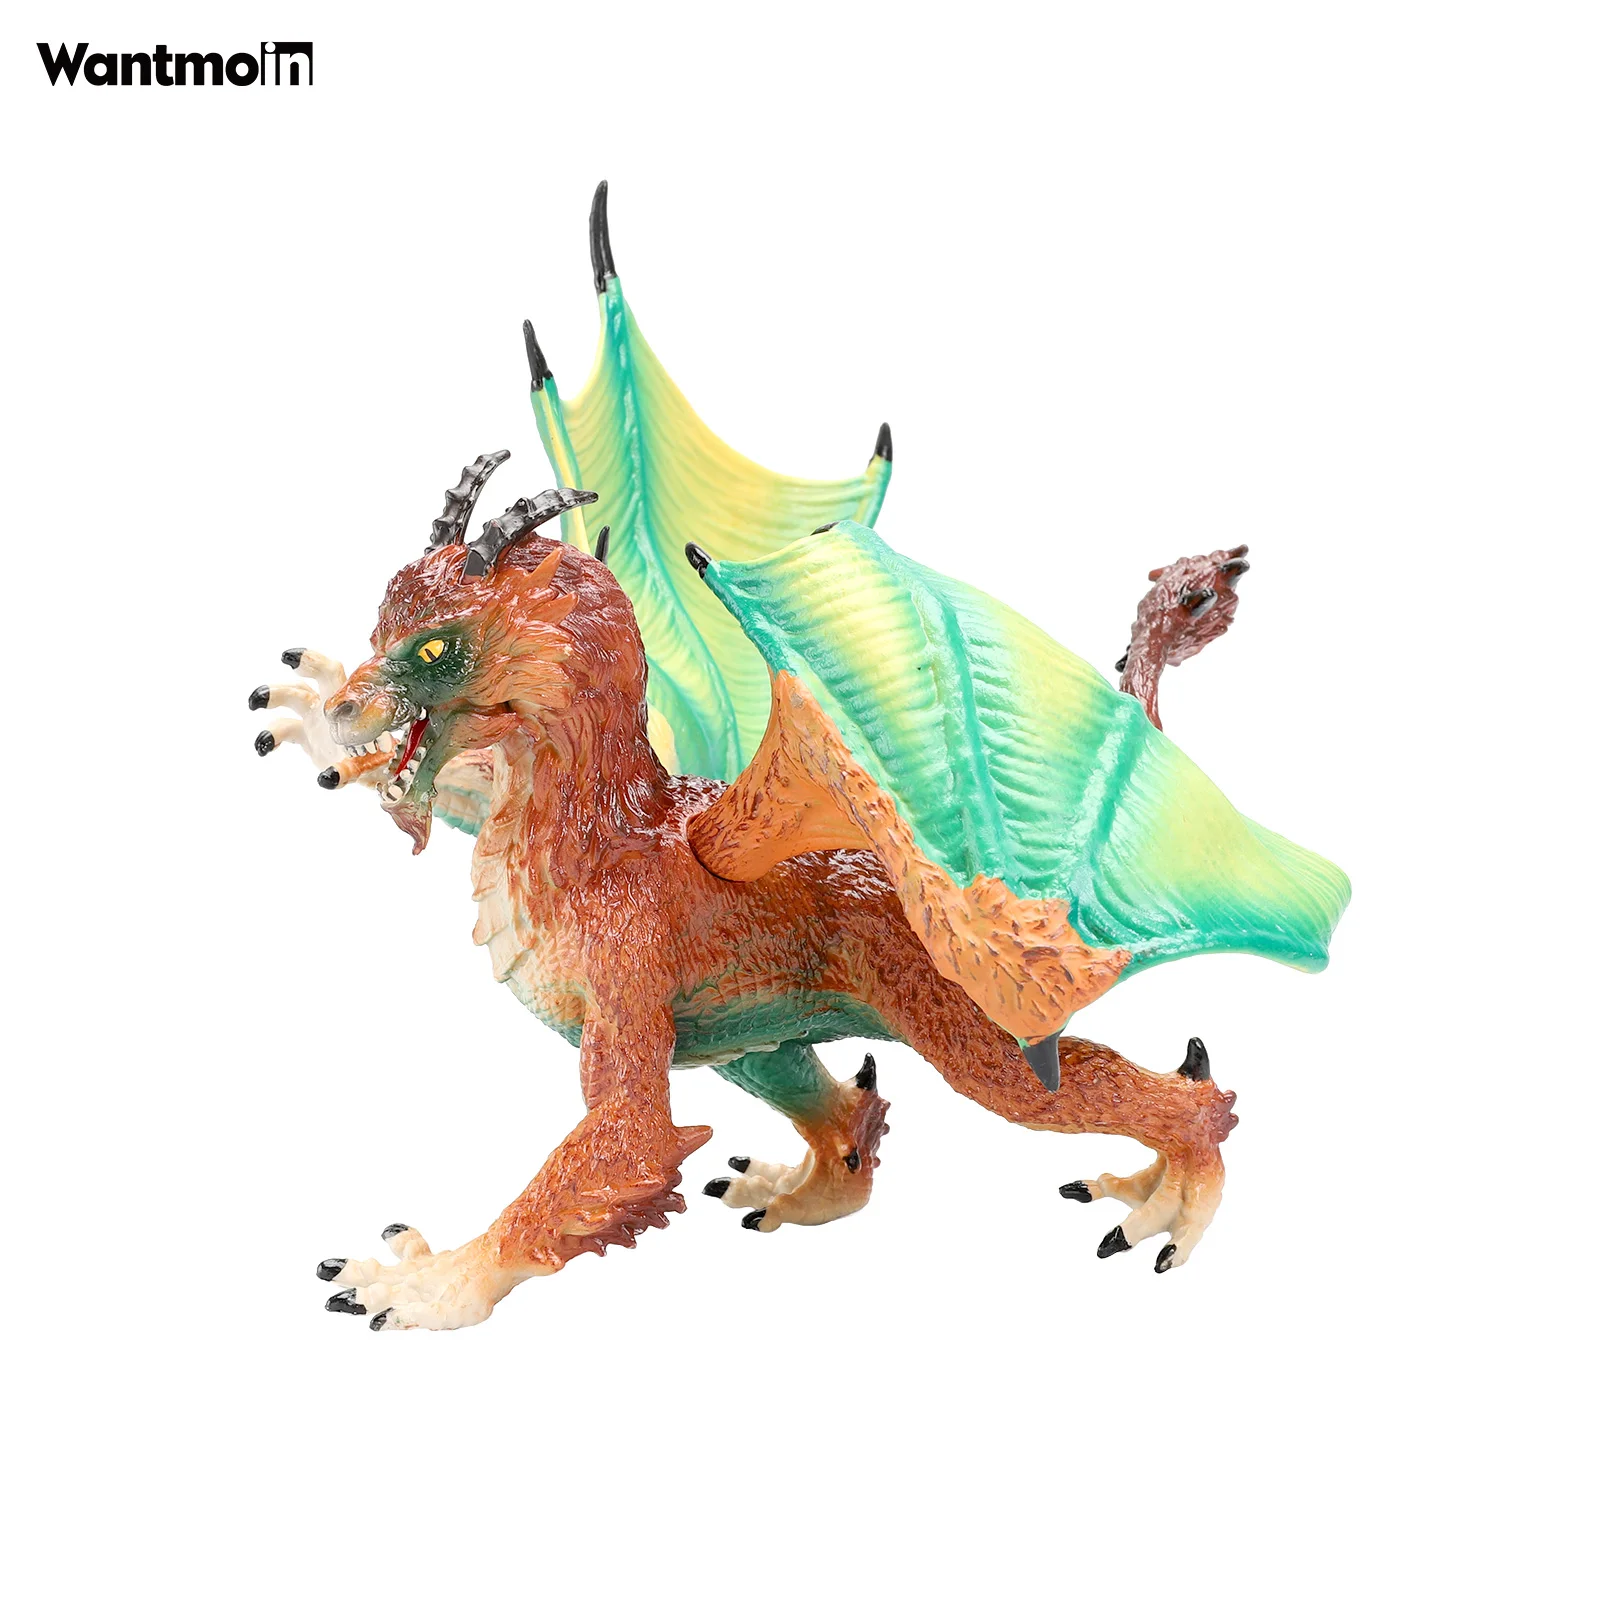 Buy Wantmoin Untamed Legends Dragon toy -plastic dragon Animal Figurine for Collection Gift Home Decoration Party Favor